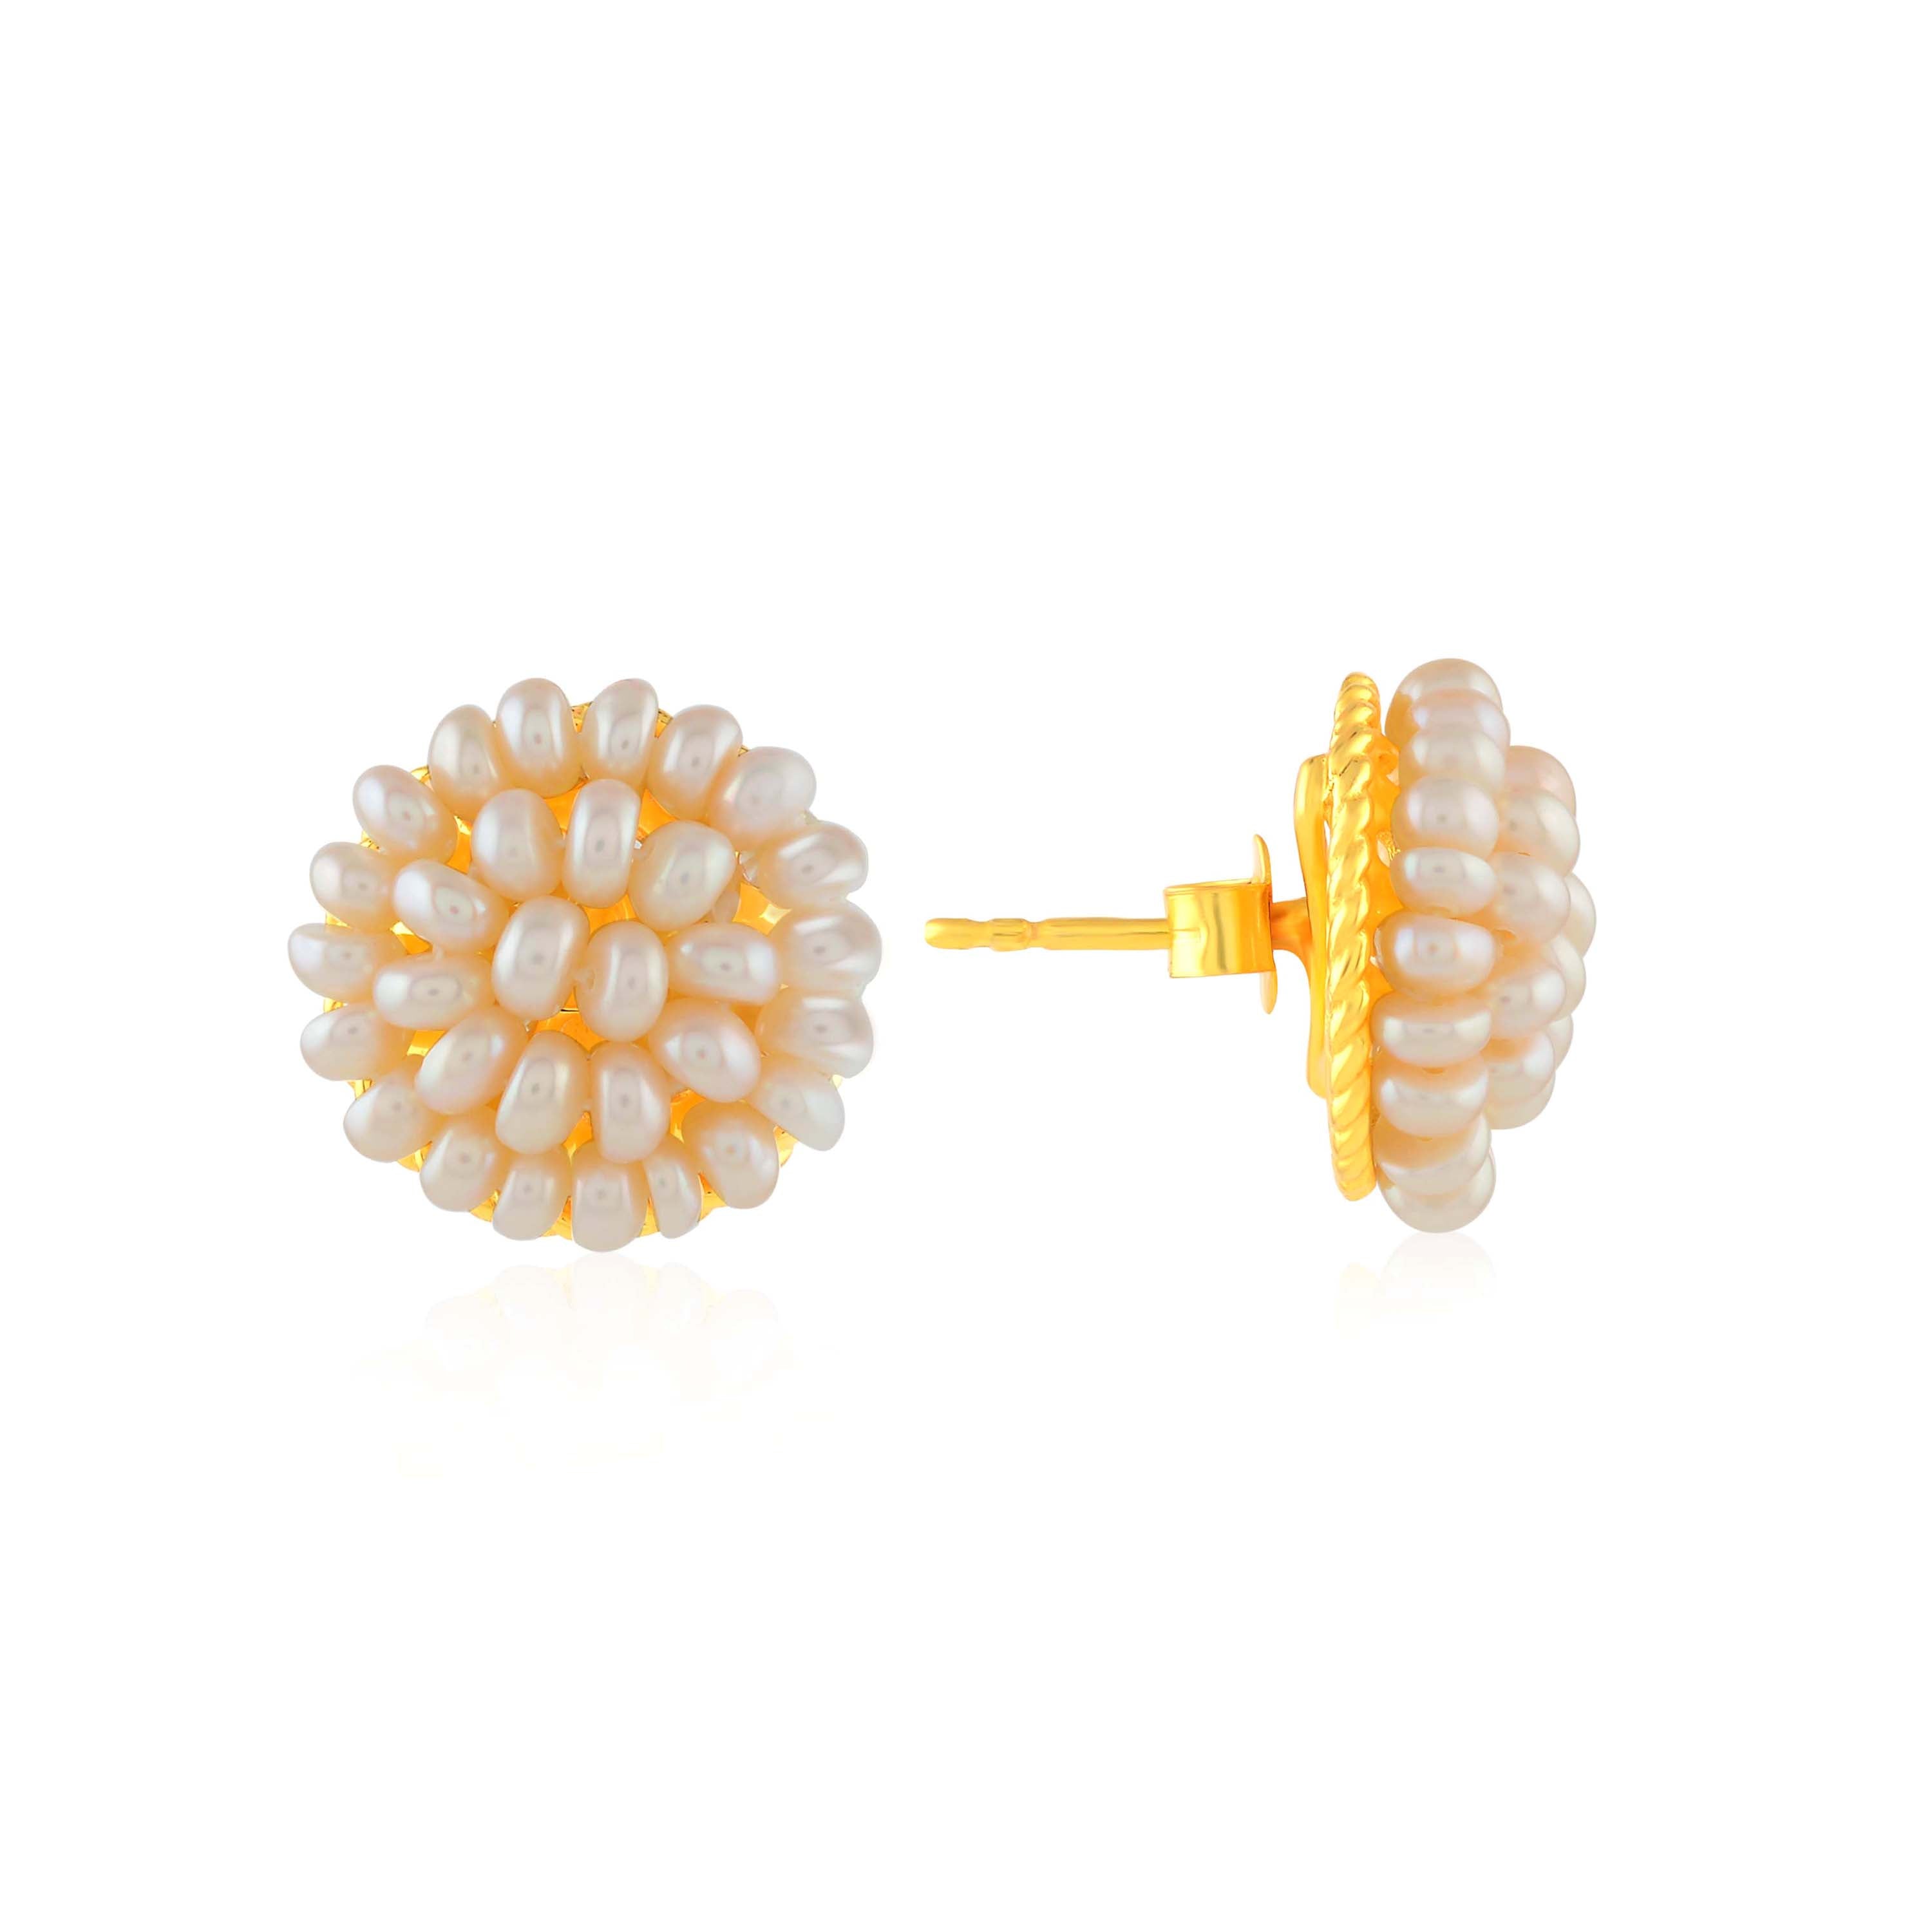 Handcrafted Intricacies Pearl Studs Earrings